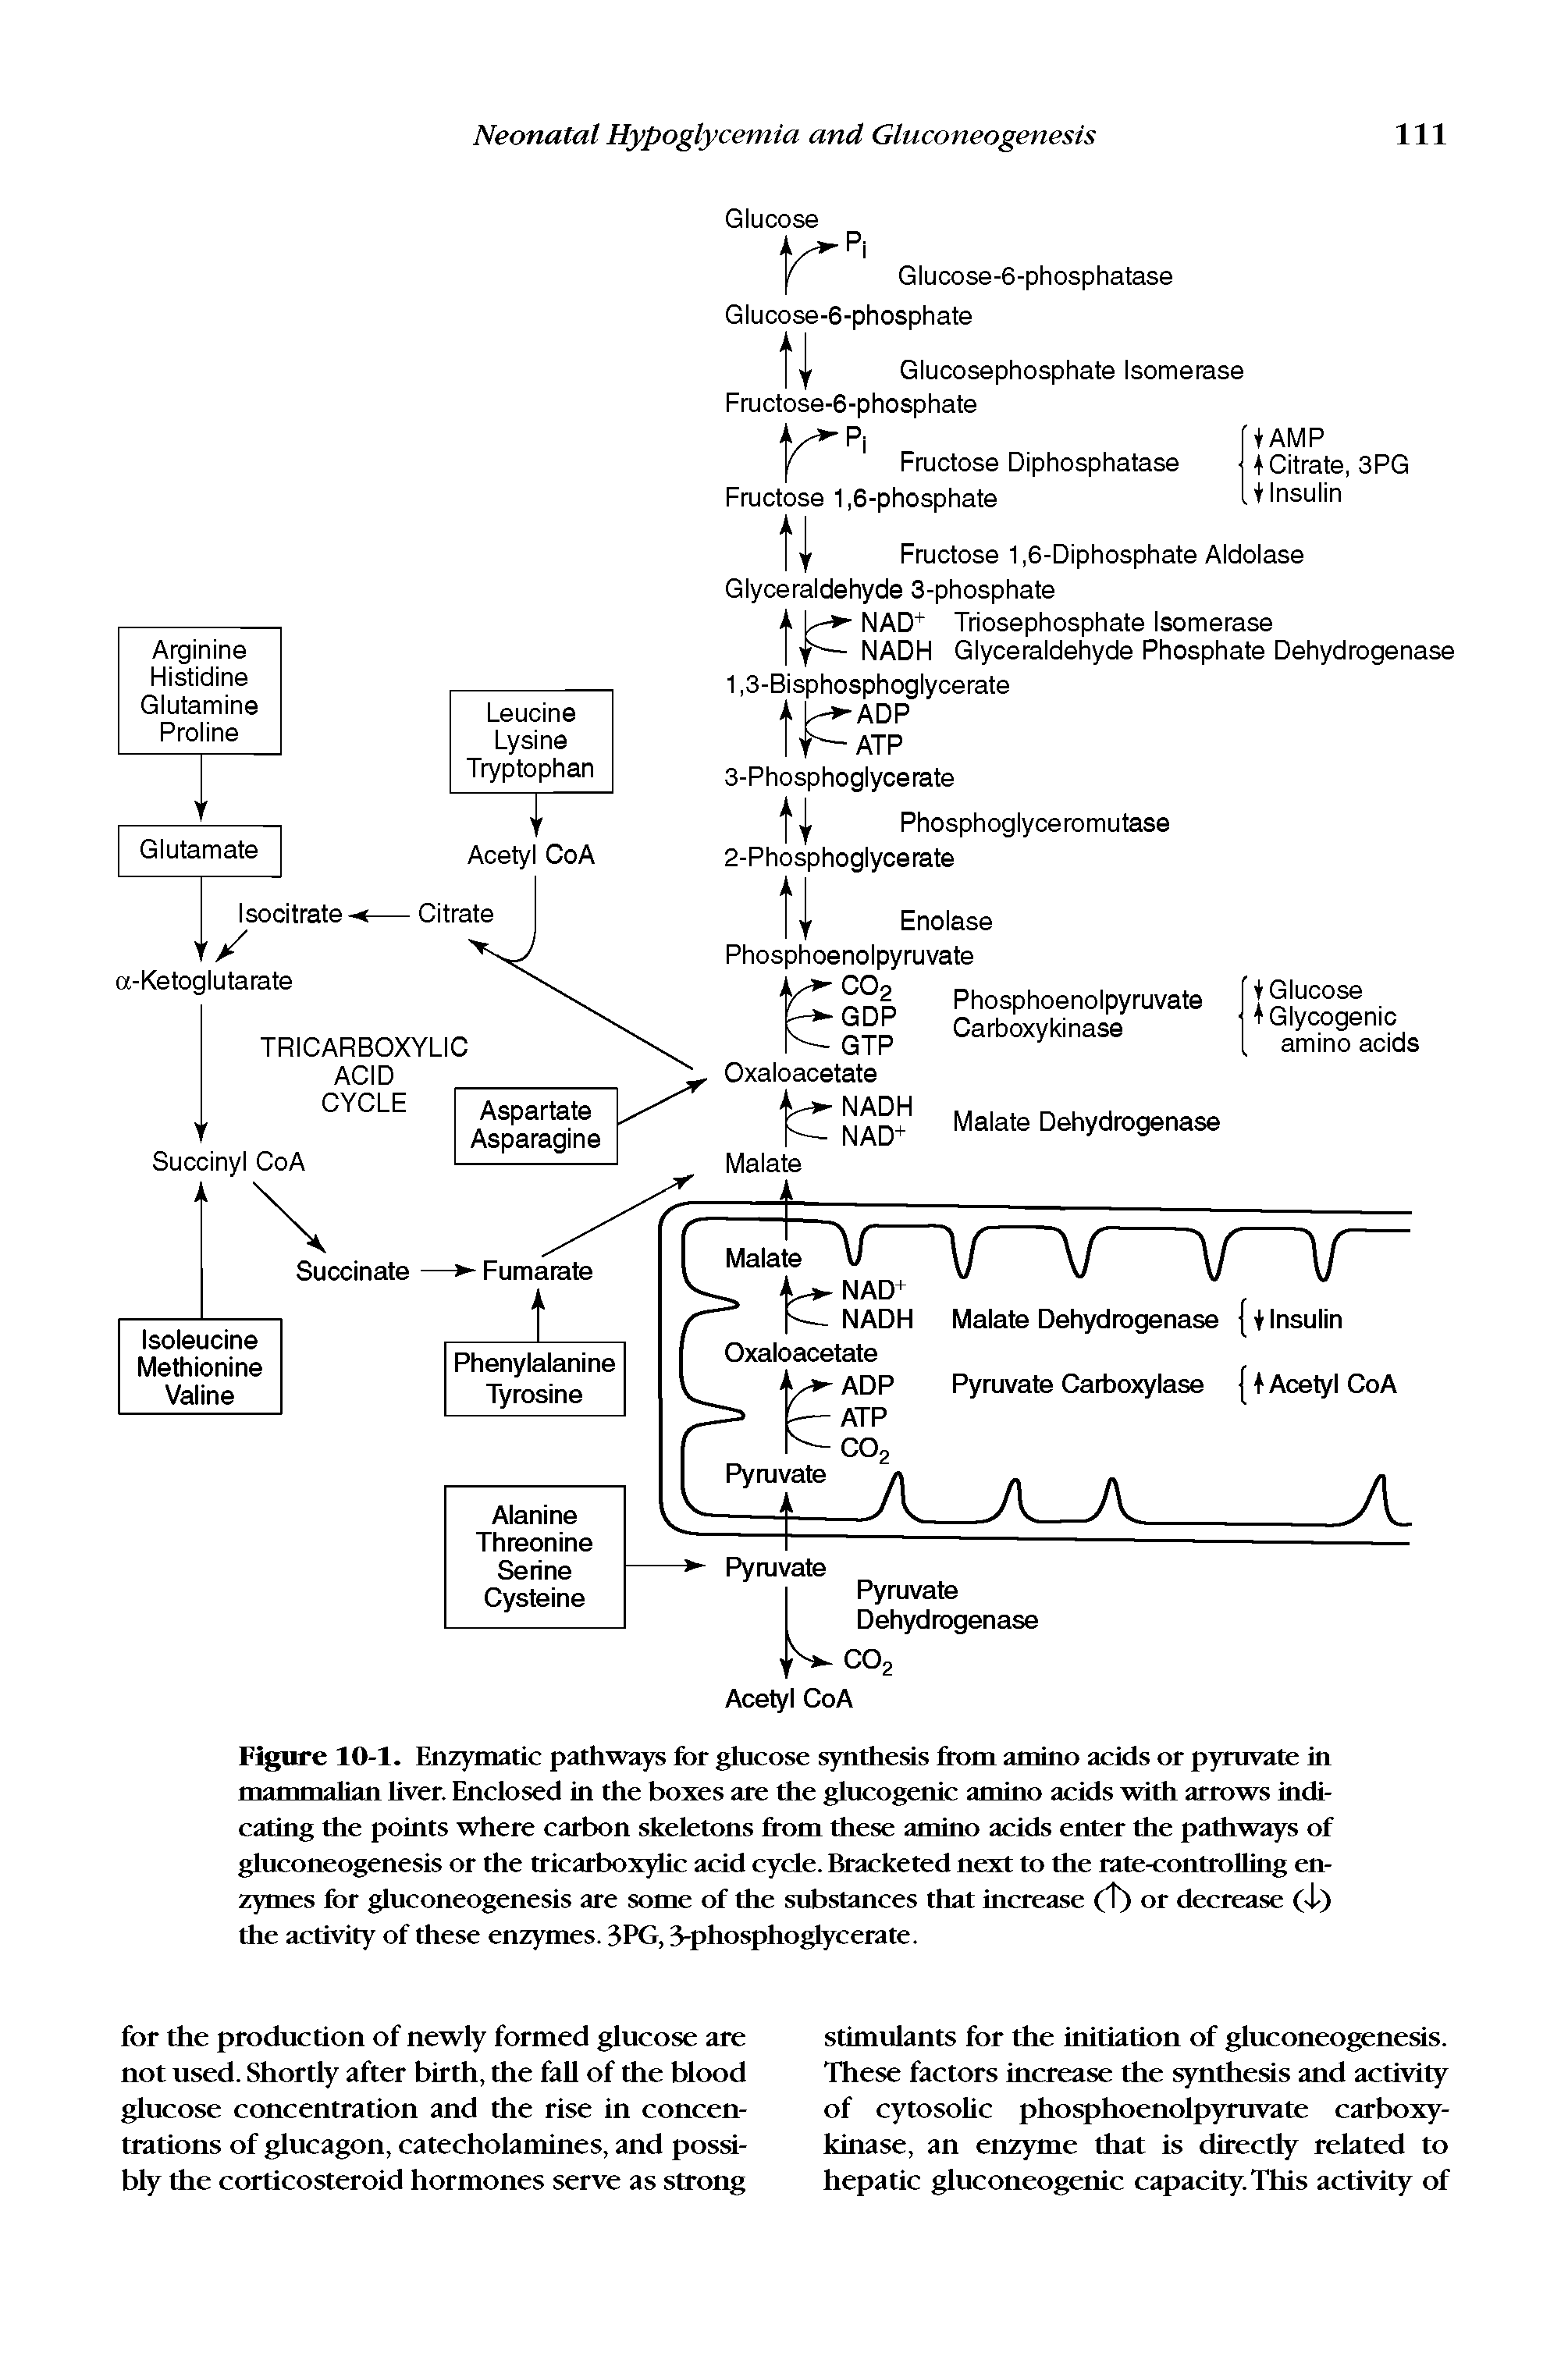 Figure 10-1. Enzymatic pathways for glucose synthesis from amino acids or pyruvate in mammalian Ever. Enclosed in the boxes are the glucogenic amino acids with arrows indicating the points where carbon skeletons from these amino acids enter the pathways of gluconeogenesis or the tricarboxylic acid cycle. Bracketed next to the rate-controlling enzymes for gluconeogenesis are some of the substances that increase (T) or decrease (1) the activity of these enzymes. 3PG, 3-phosphoglycerate.